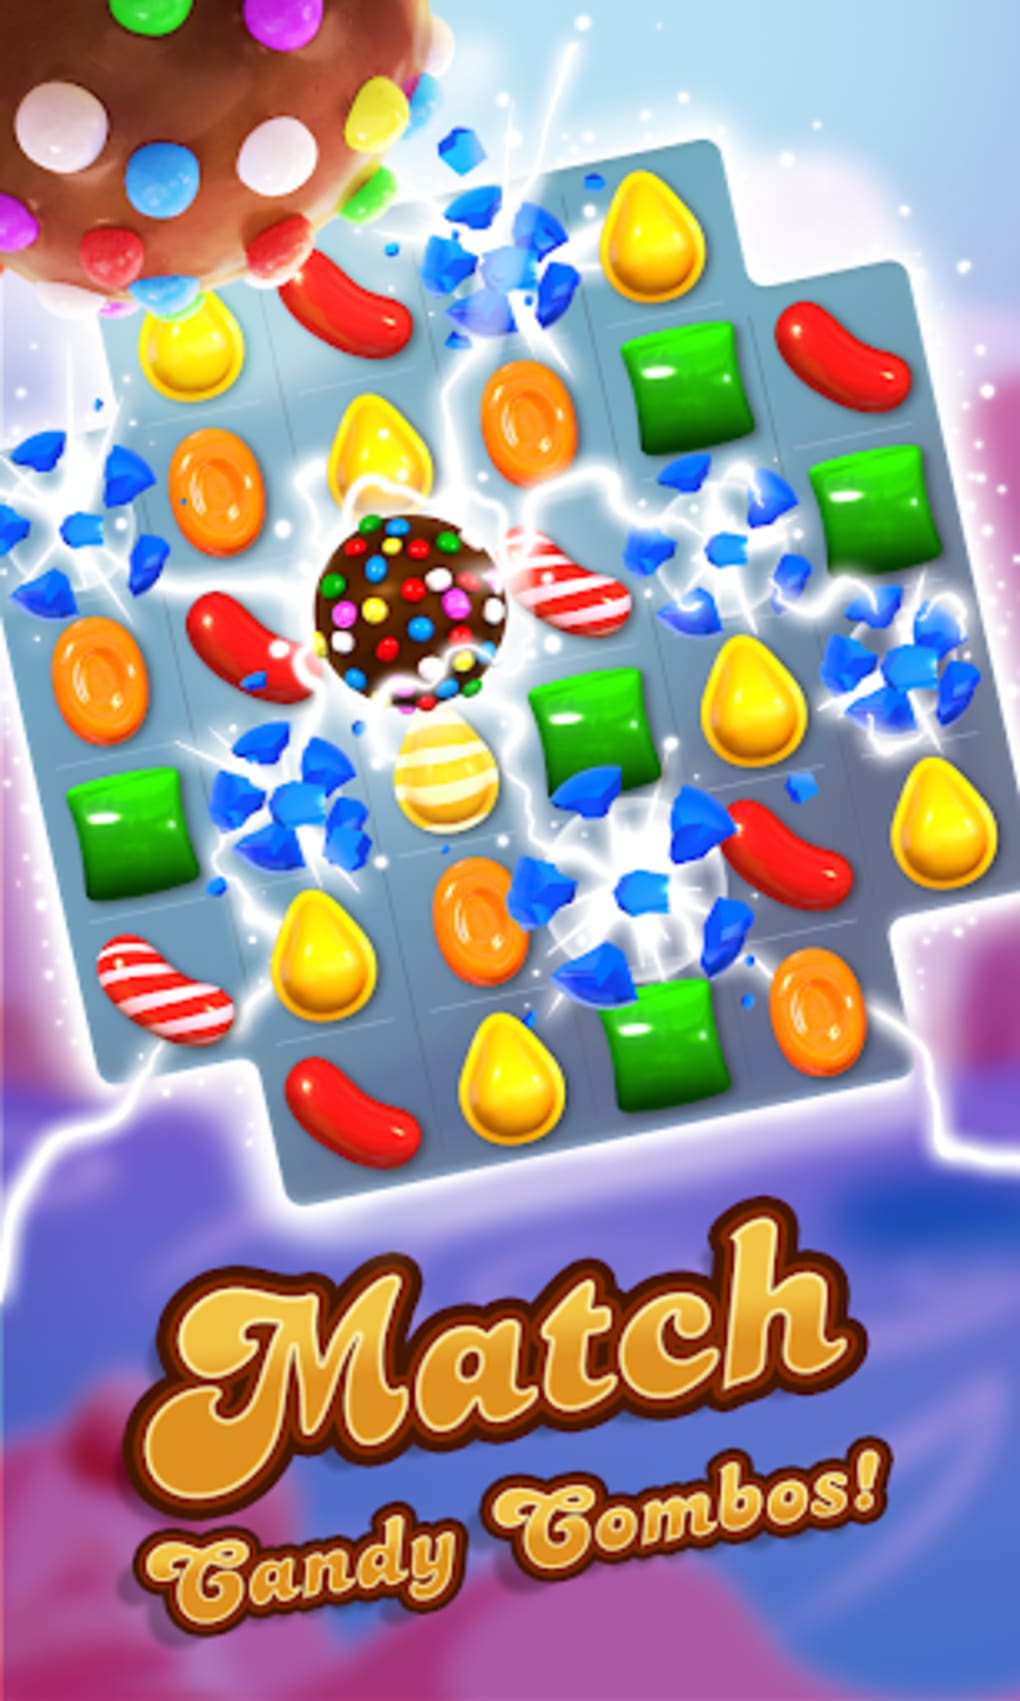 Download Candy Crush Saga Apk 127241 For Android